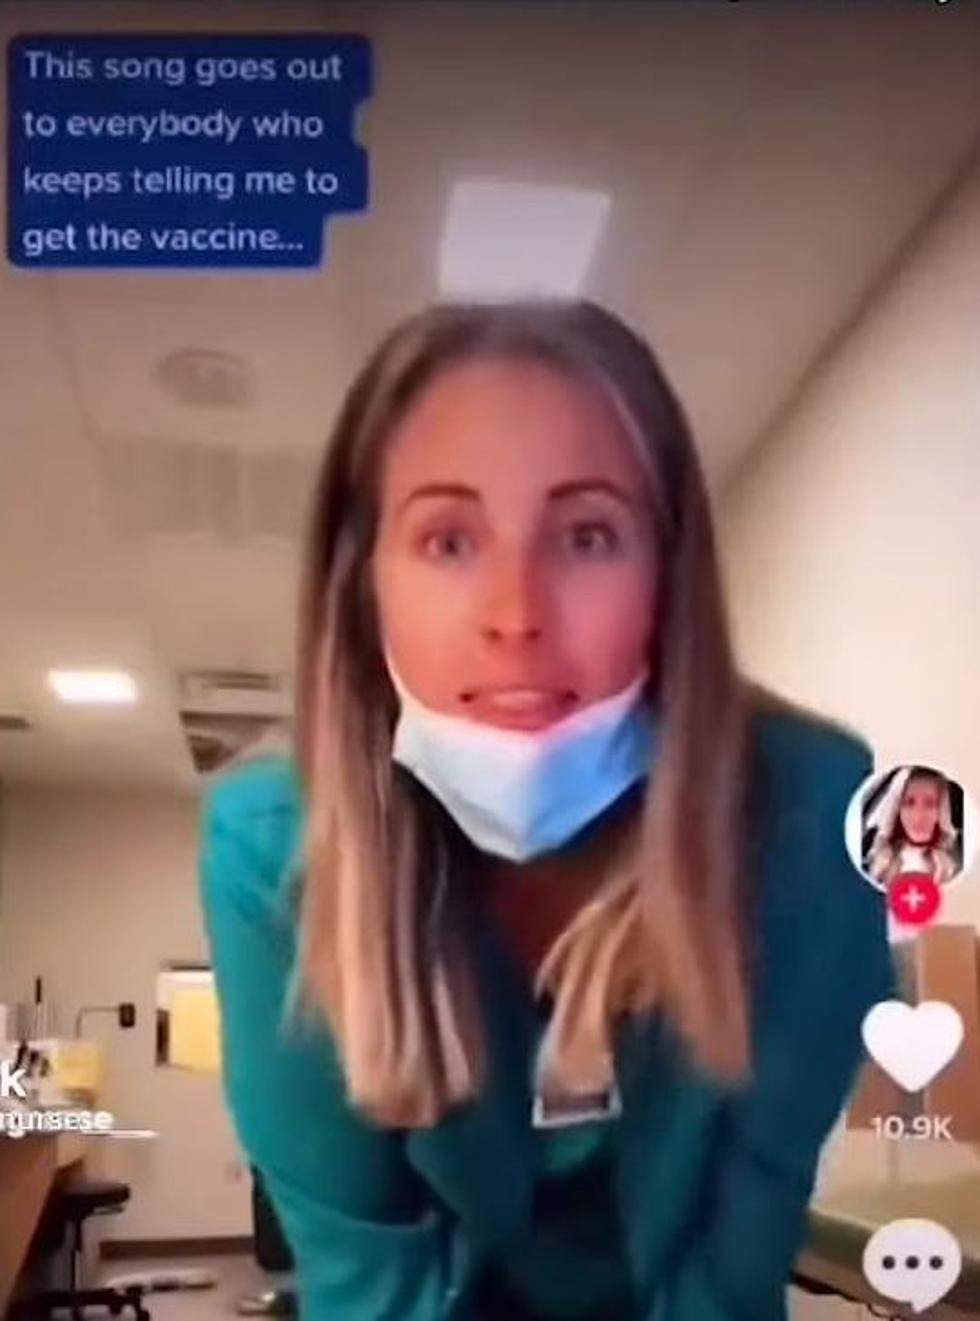 Grand Rapids Nurse Goes Viral with Anti-Vaccine and Anti-Mask Videos